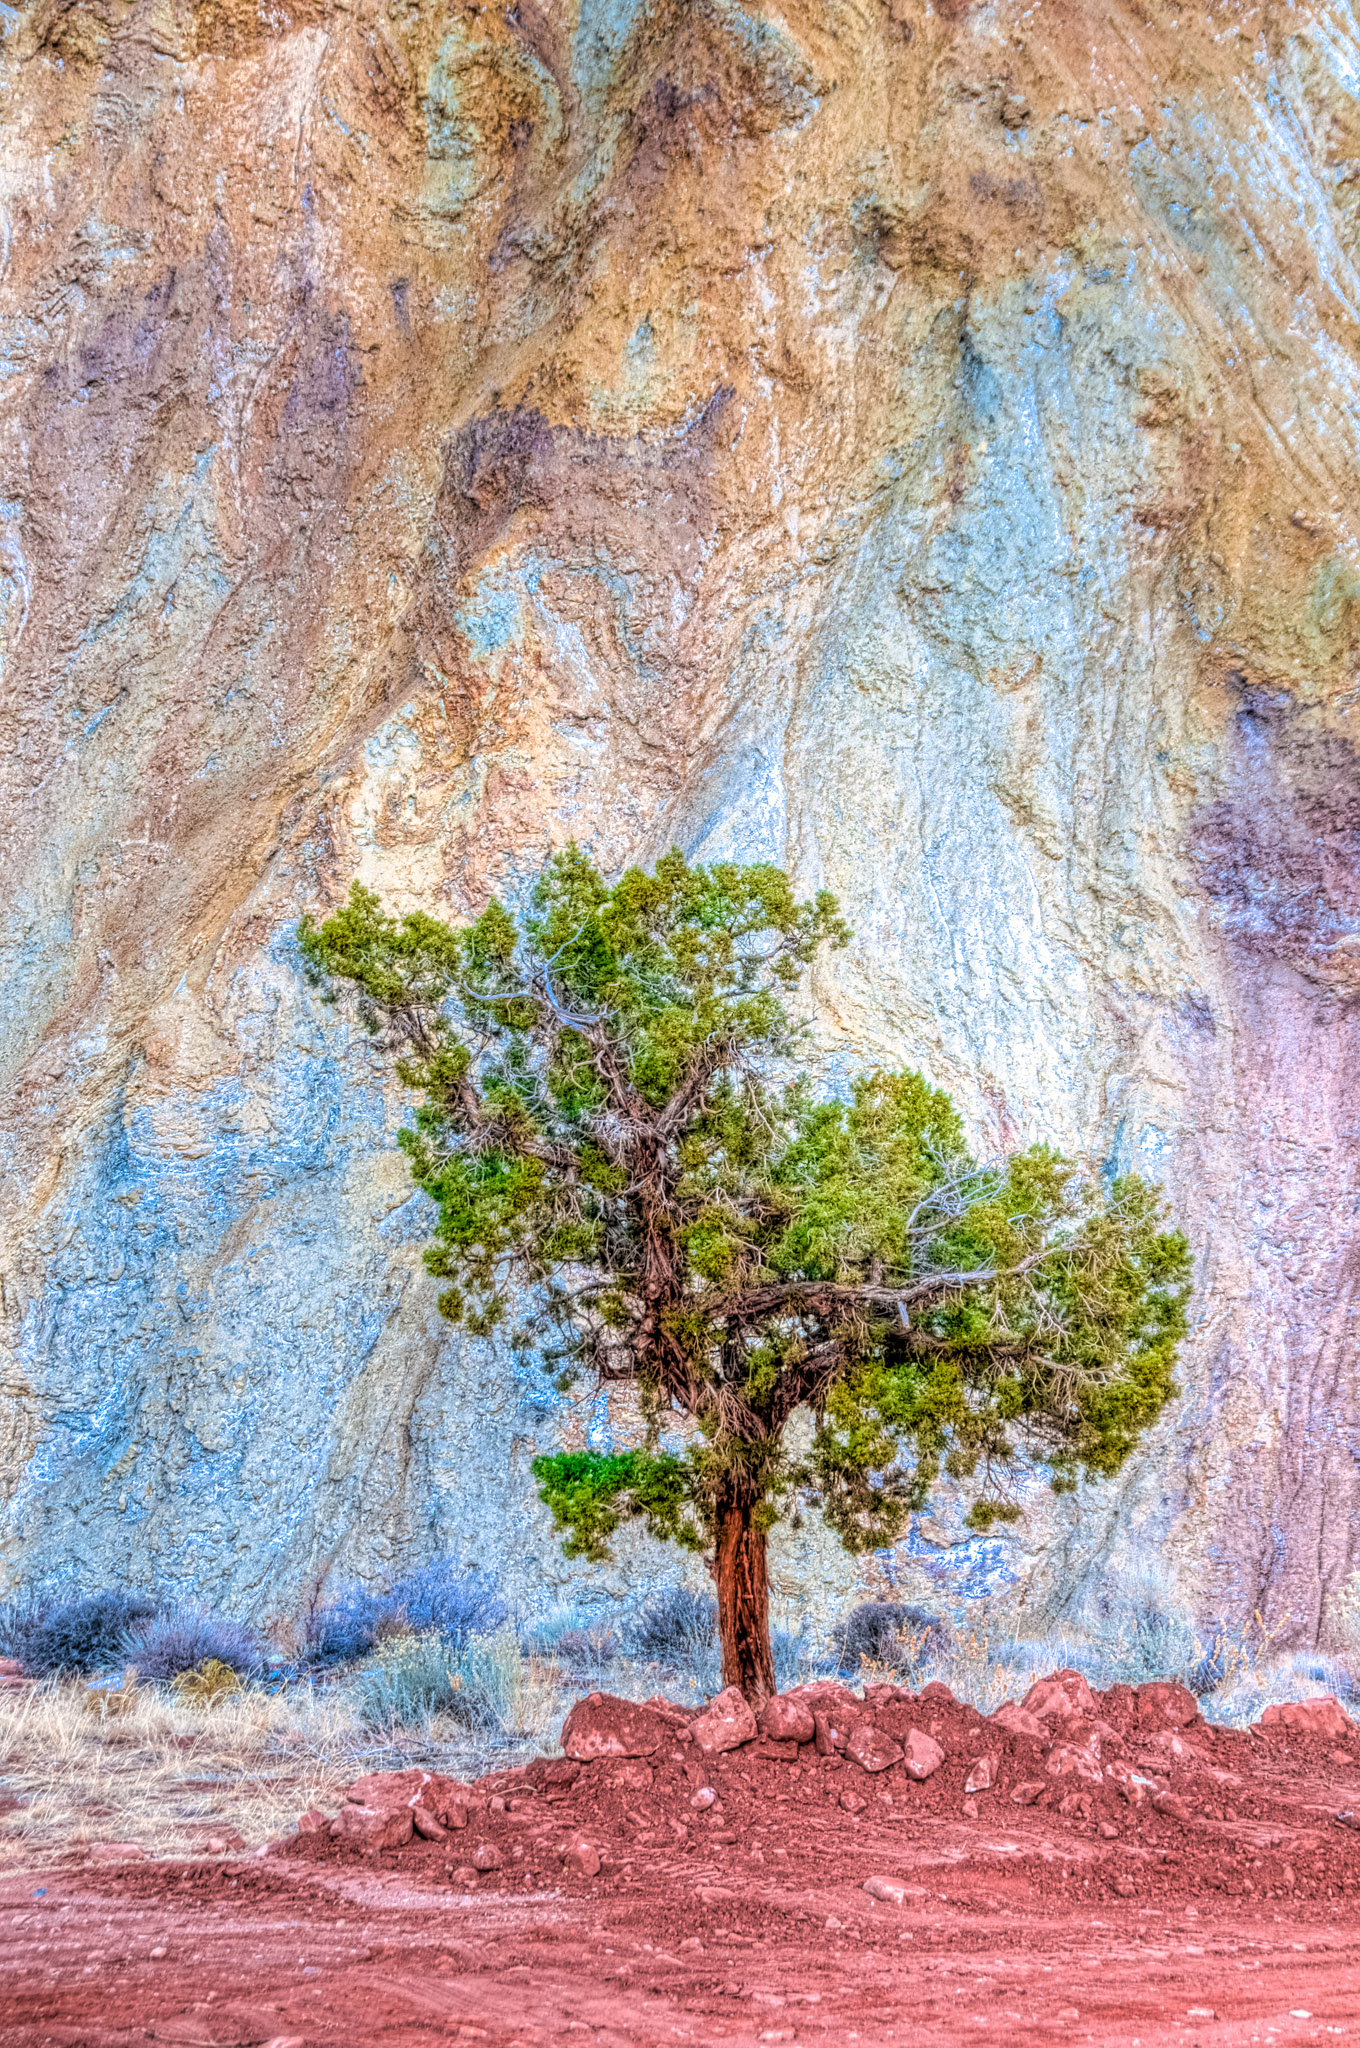 Tree in Onion Creek Canyon near Moab, Utah. The geology behind the tree is the  salt diapir of the Paradox Formation whose uplift created many of the fins, arches, and other interesting geology of this area.